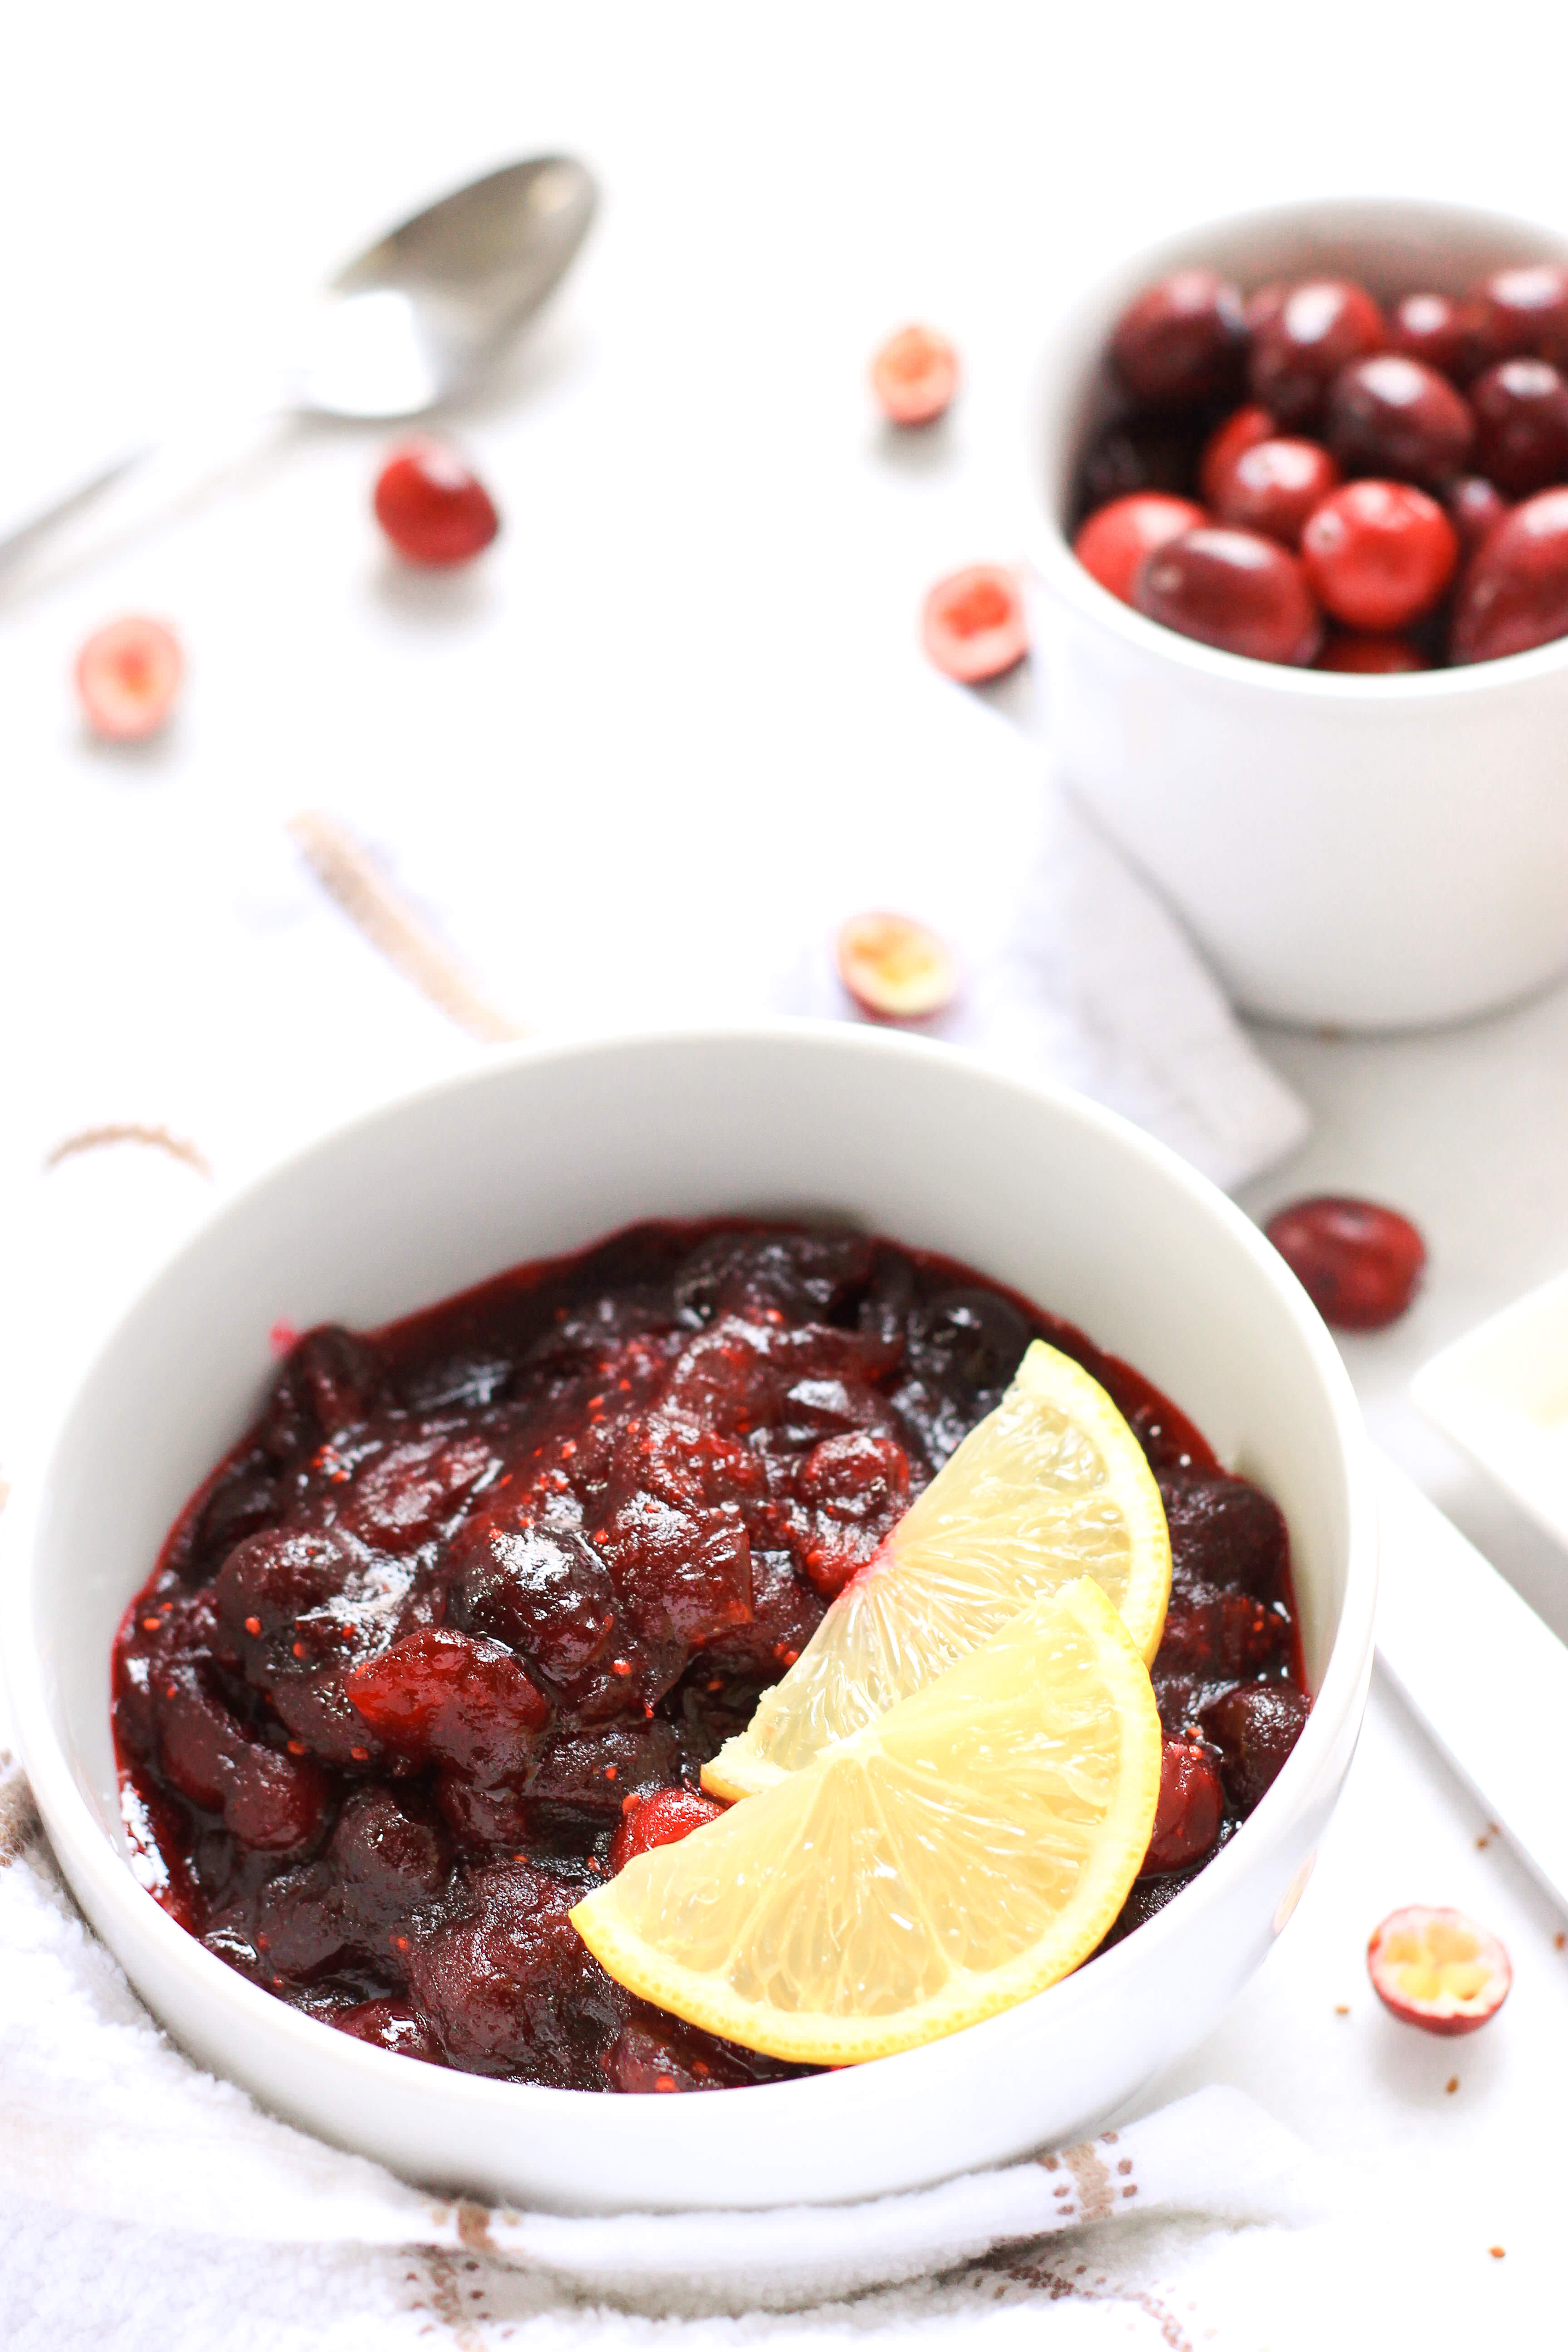 Cranberry sauce in a bowl with lemon slices.